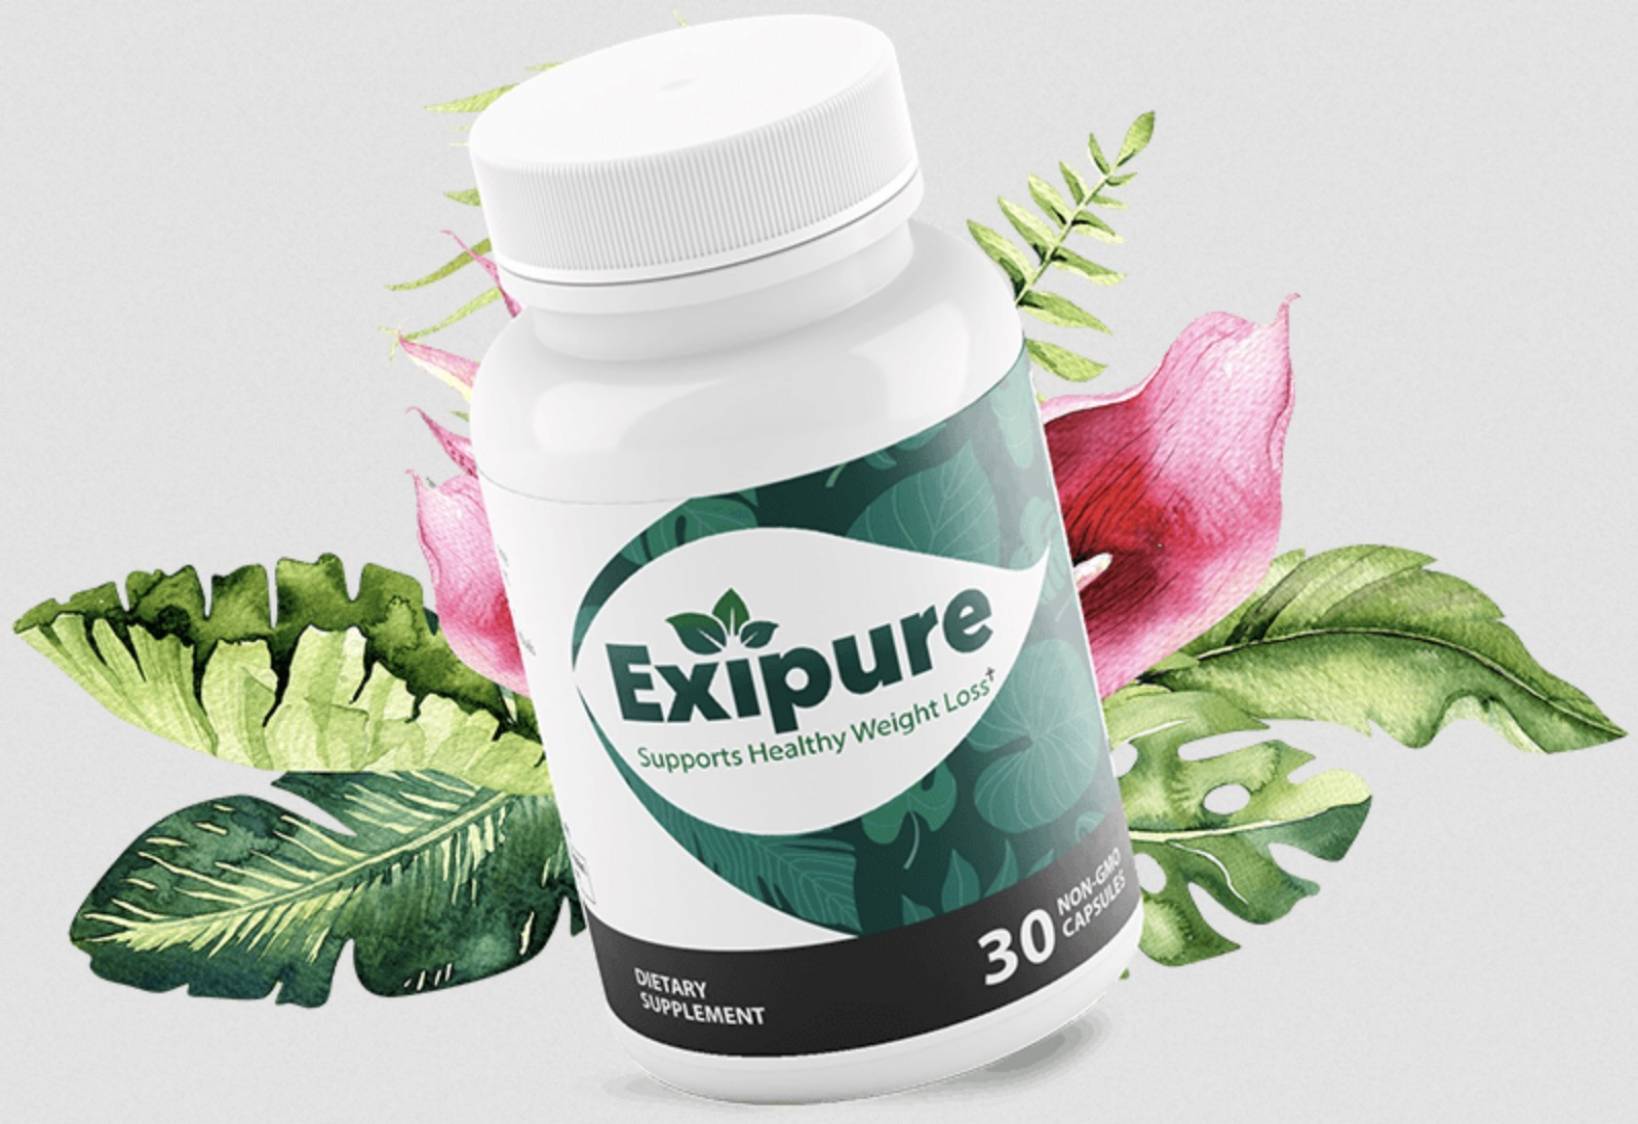 What Is The Best Price For Exipure